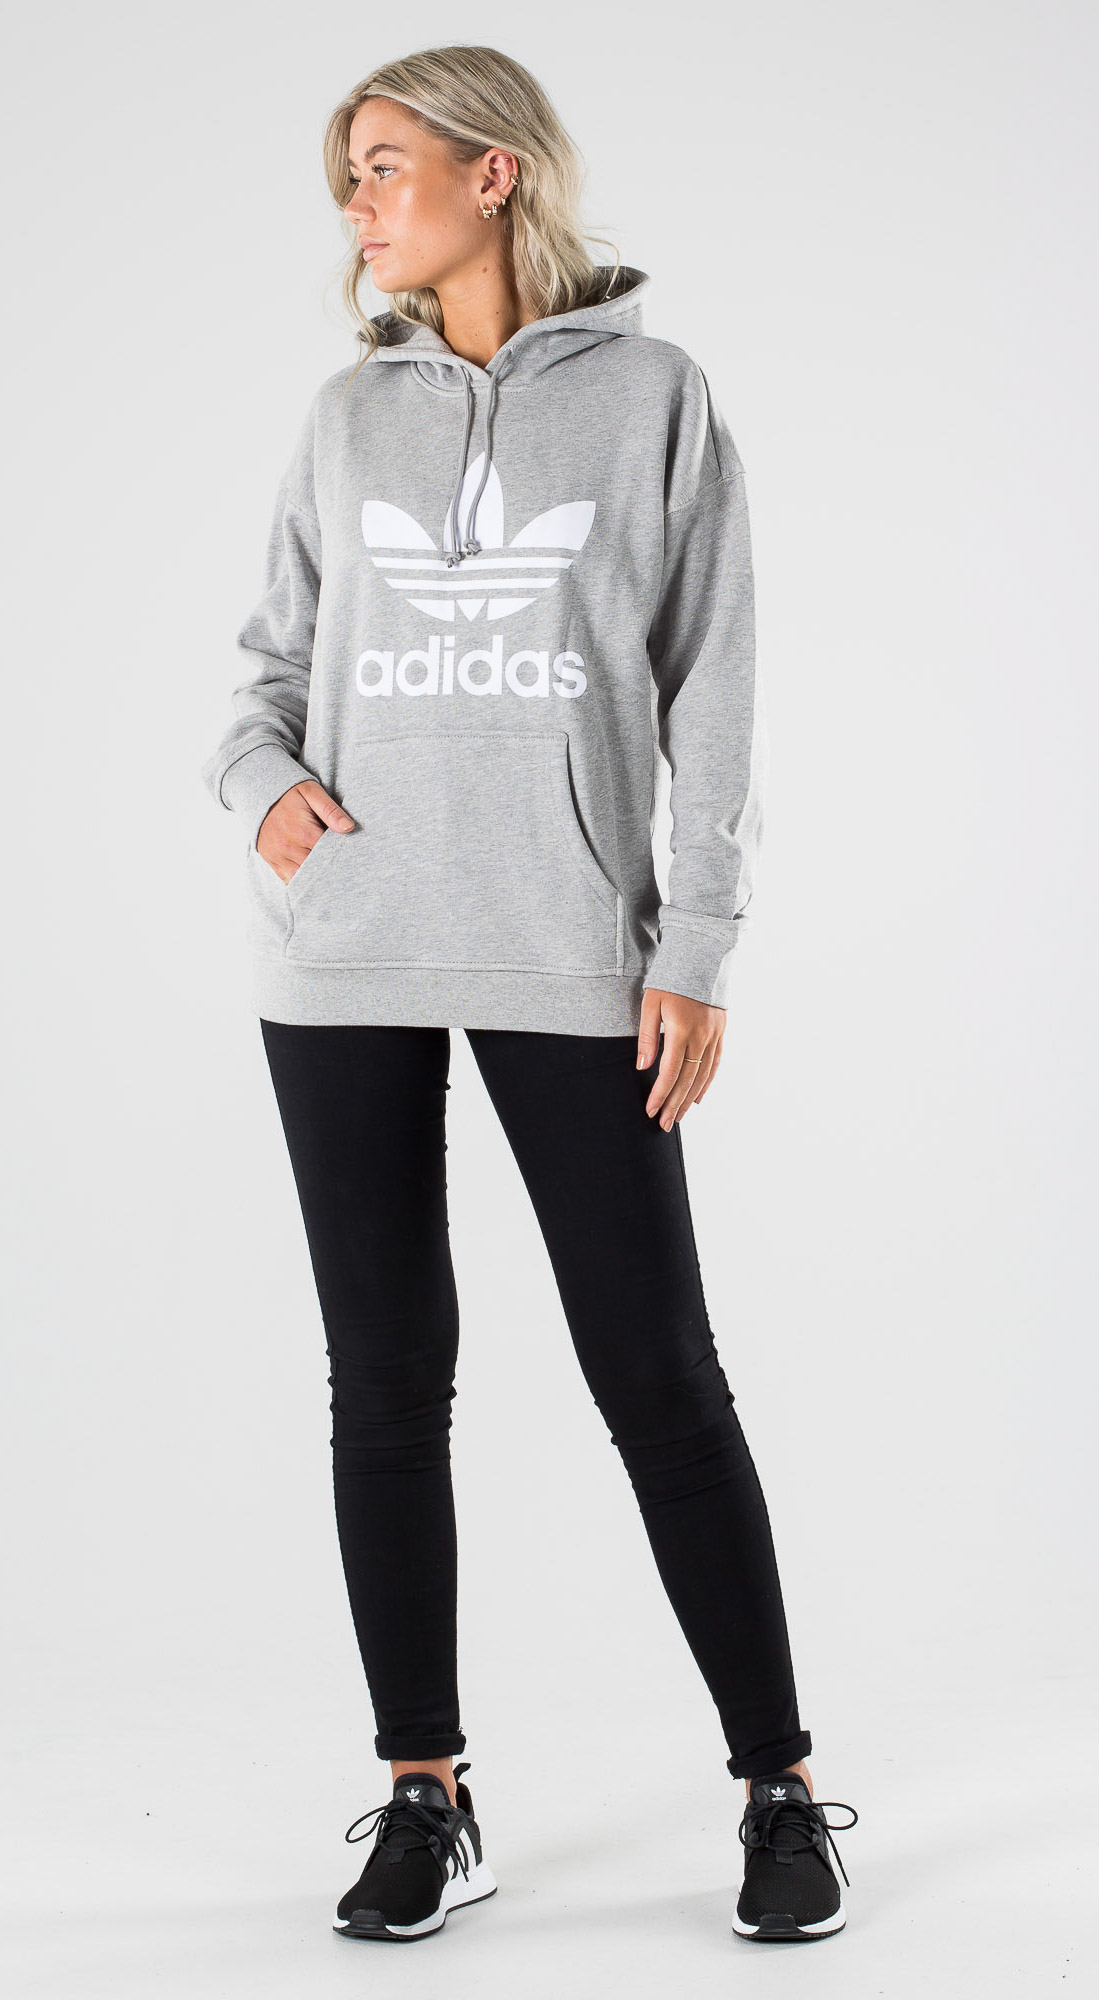 adidas hoodie outfit